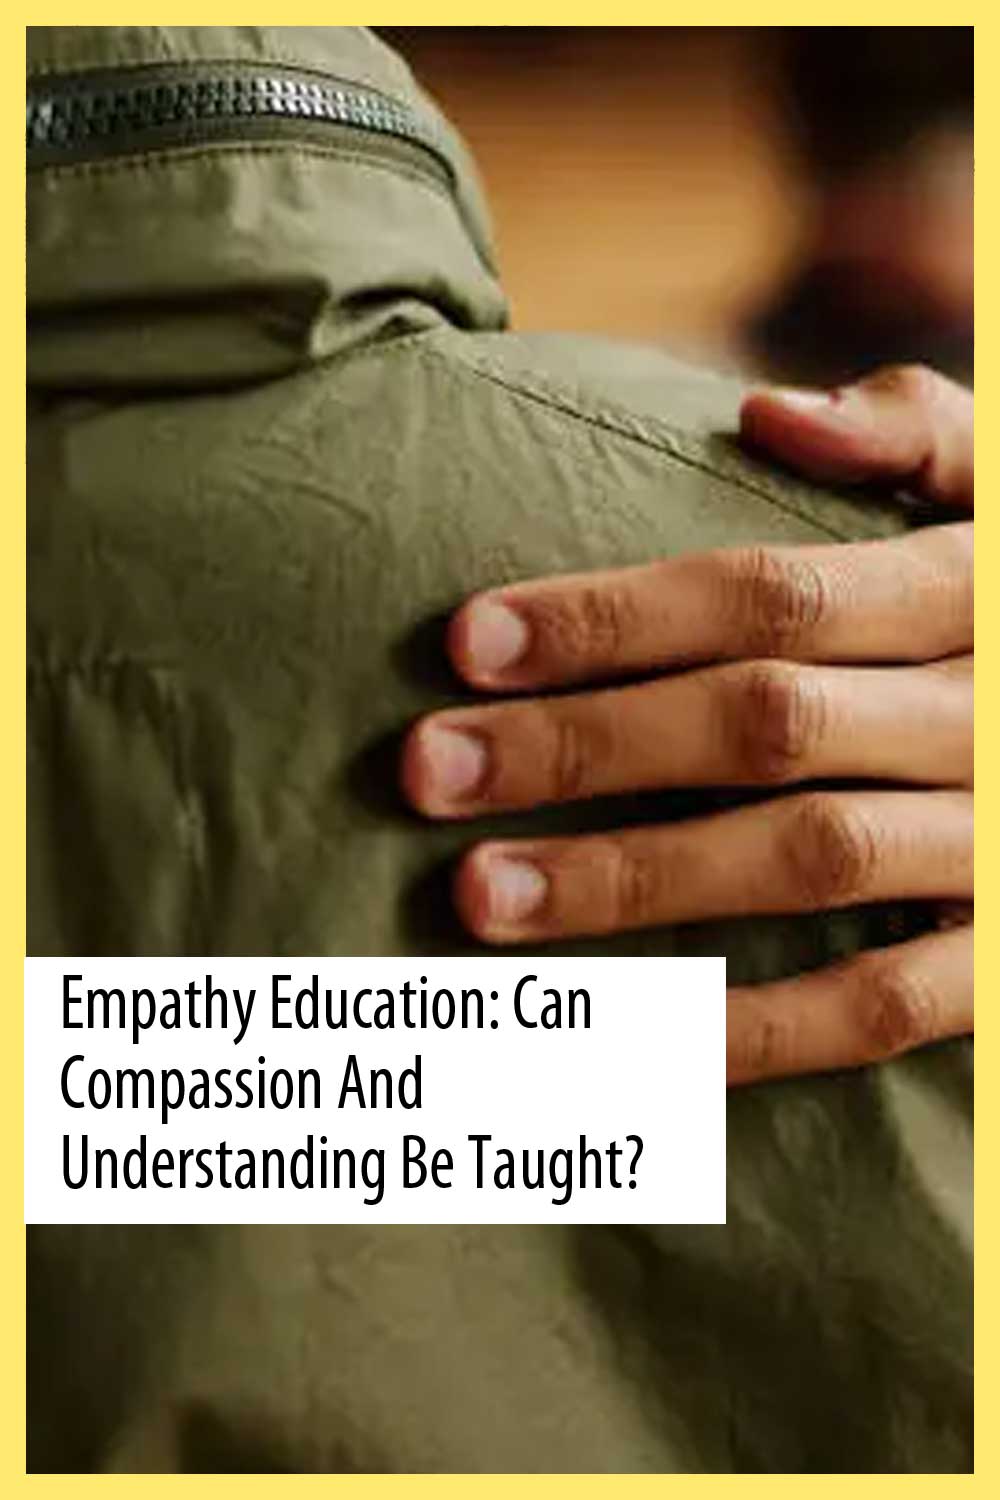 Empathy Education: Can Compassion and Understanding Be Taught?